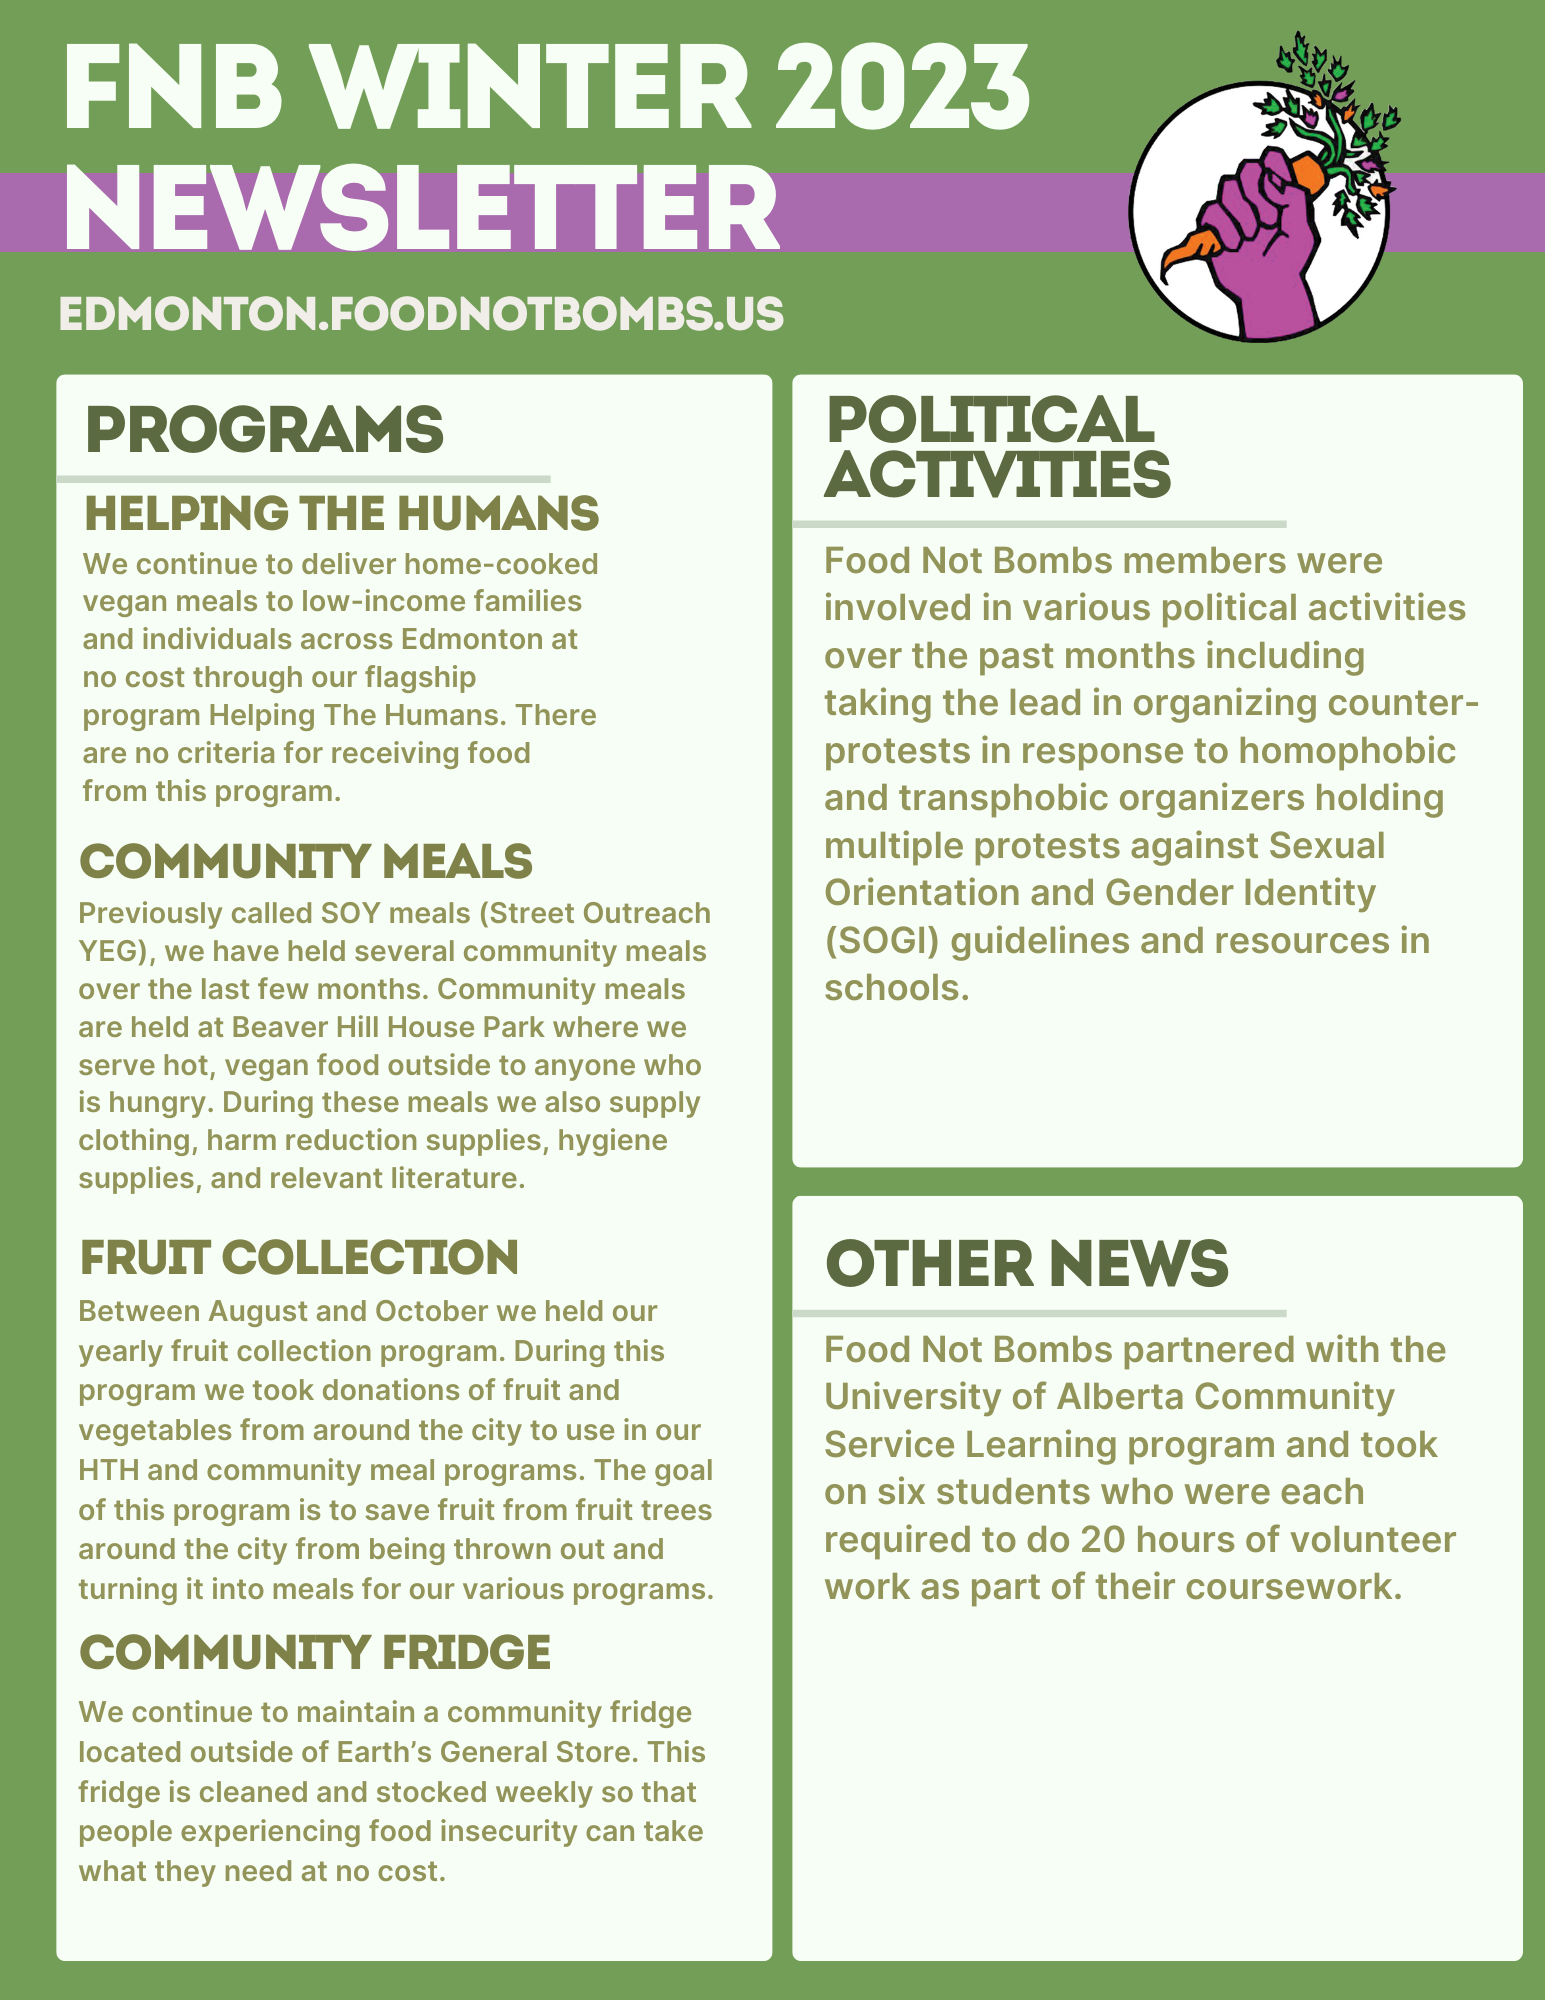 Food Not Bombs Newsletter for Winter 2023.